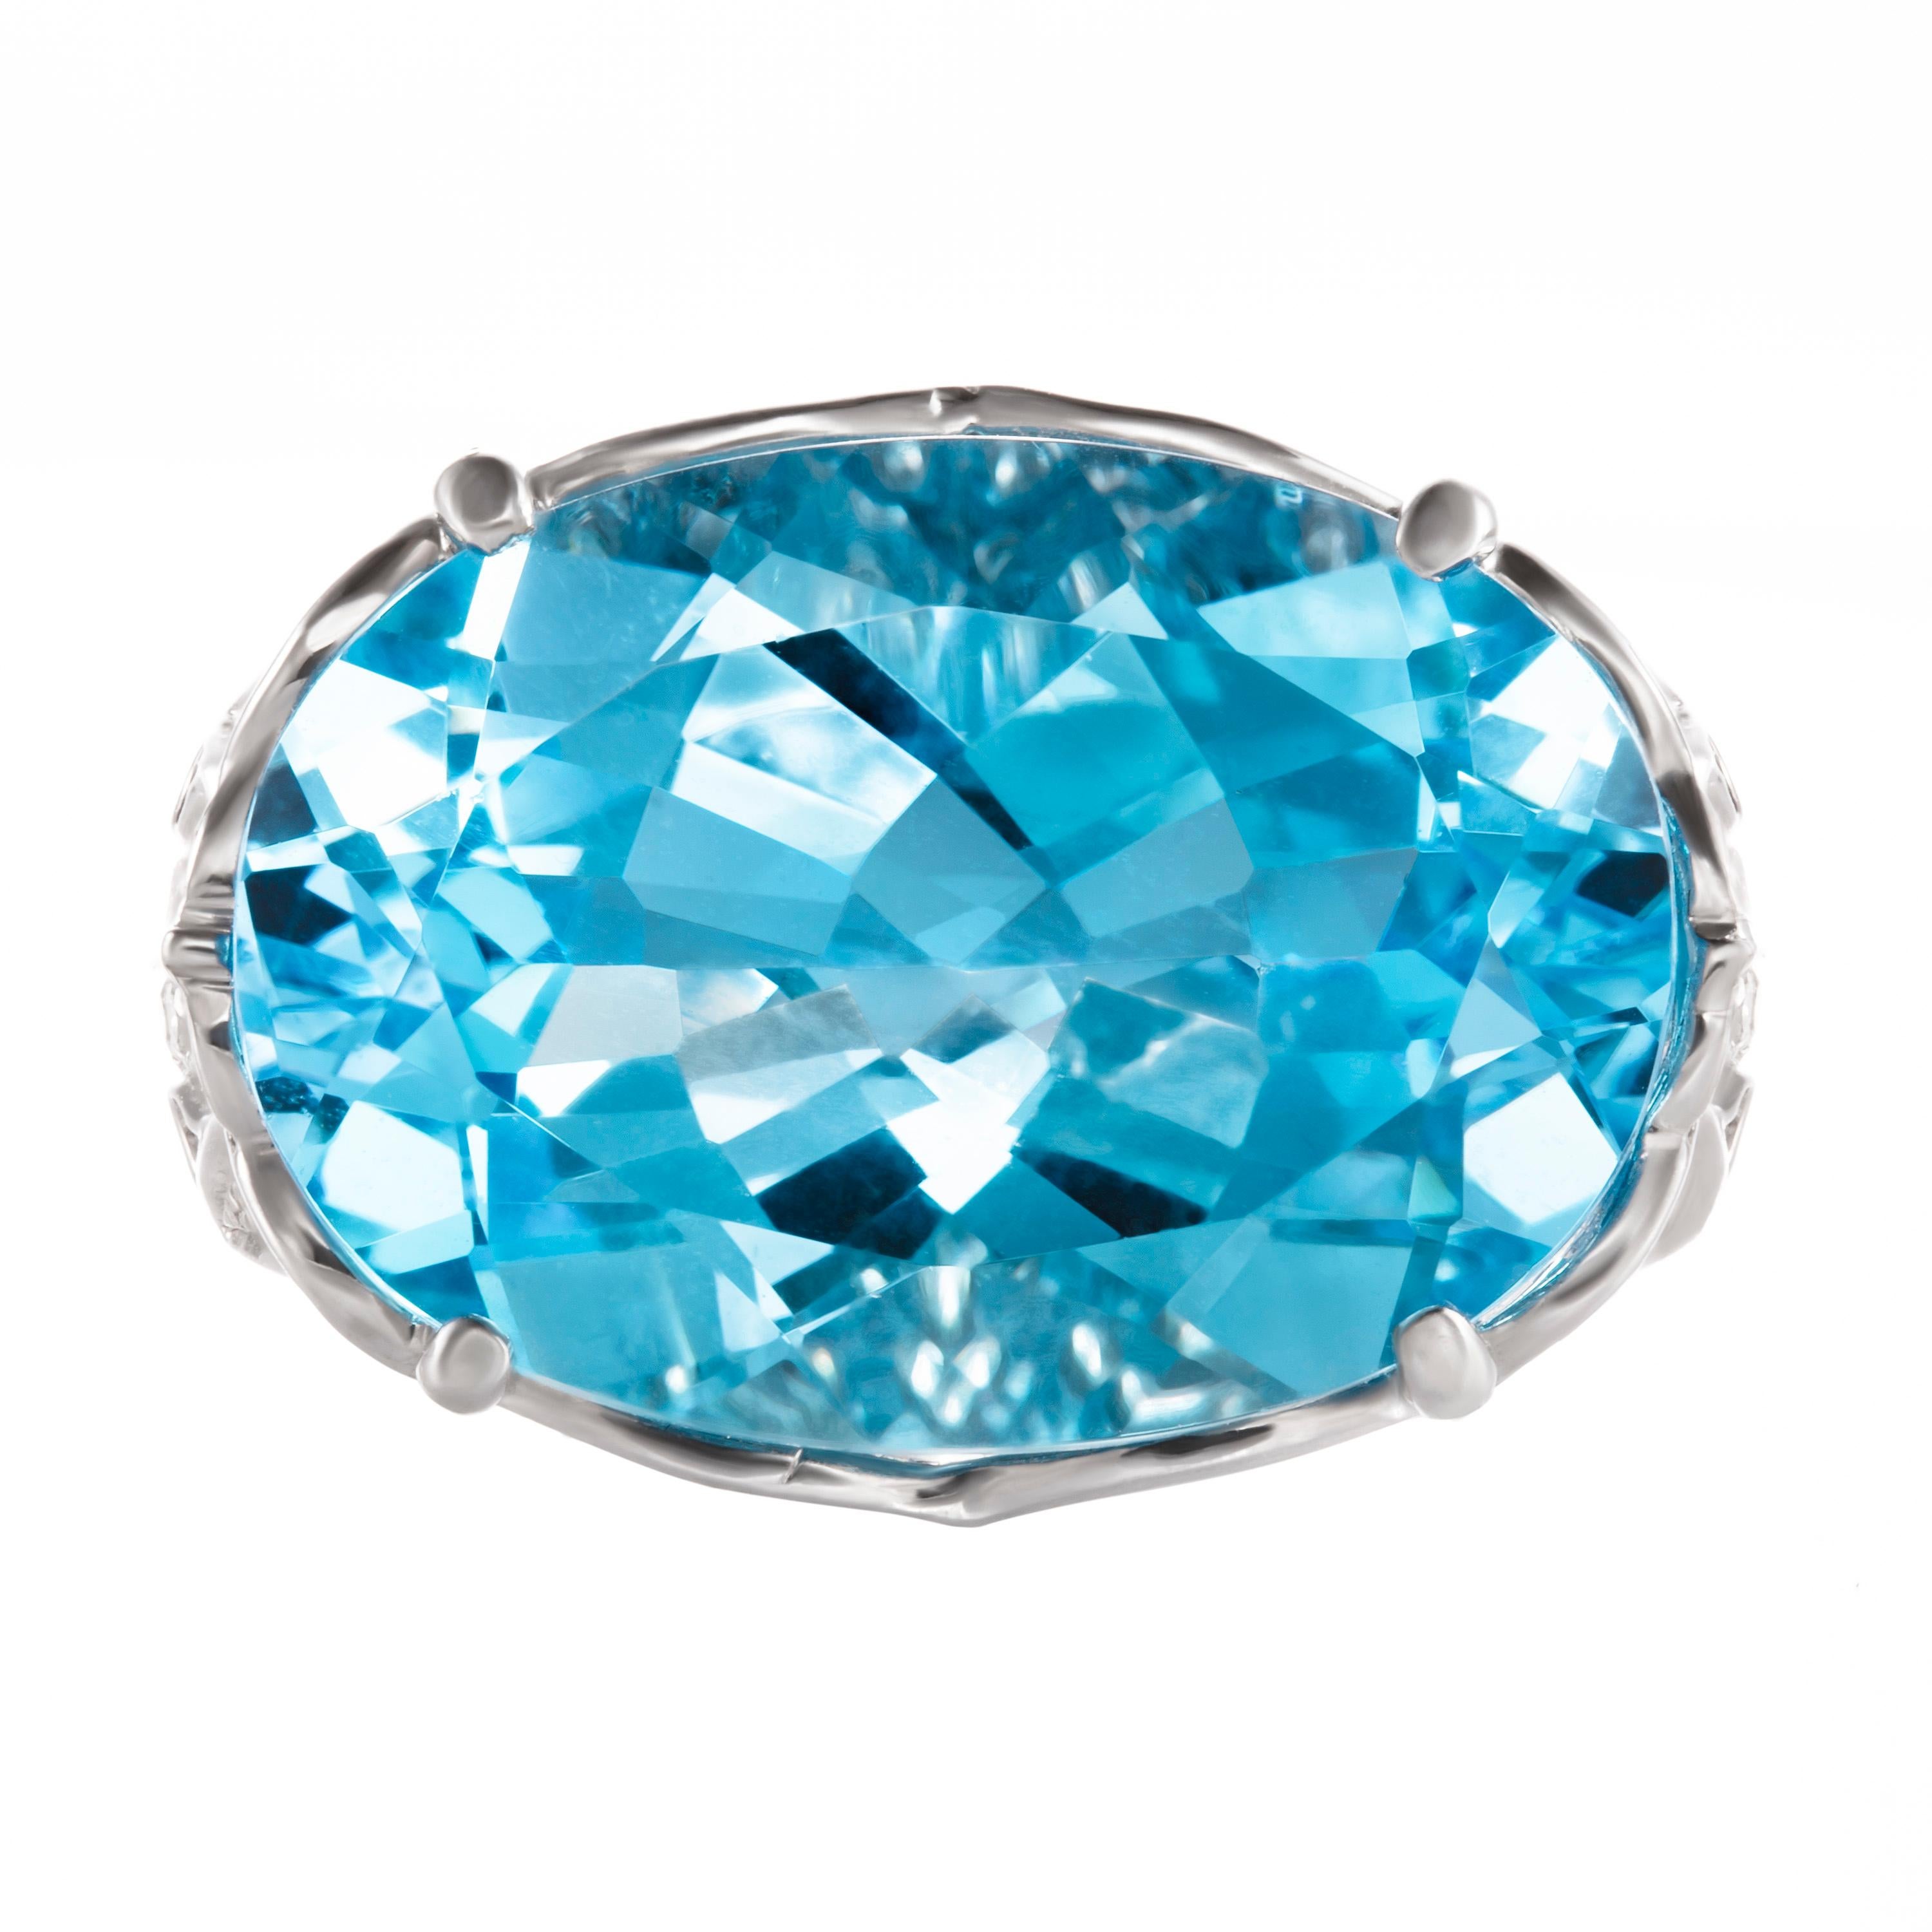 Distinguished by a stunning 19.04 carat oval-cut blue topaz, Butani's ring is destined to make a statement. It's set atop an 18-karat white gold band that's encrusted with 2.45 carats of light-catching white diamonds. Currently a ring size US 6.5. 